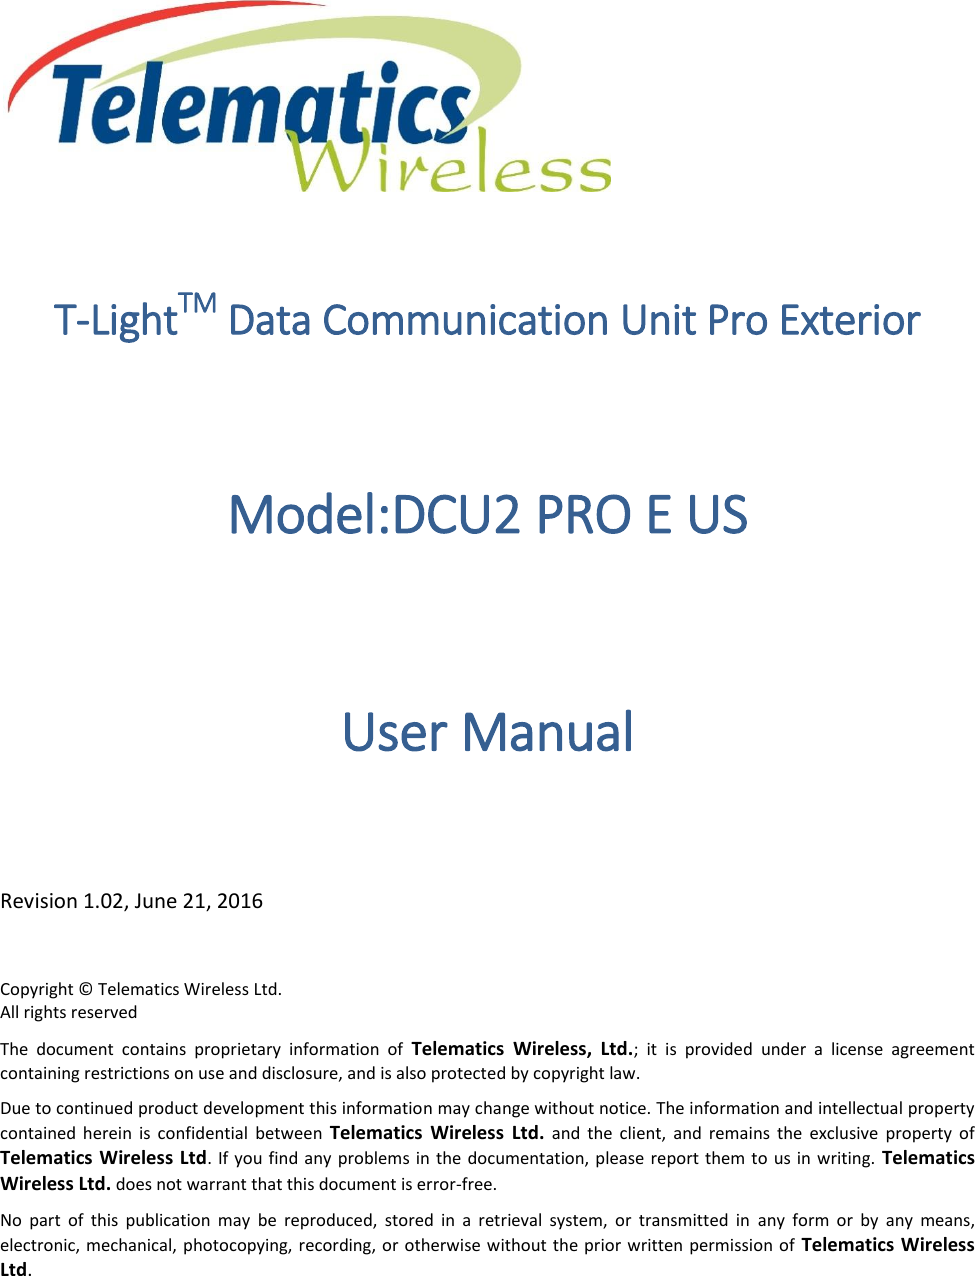  T-LightTM Data Communication Unit Pro Exterior Model:DCU2 PRO E US  User Manual Revision 1.02, June 21, 2016 Copyright © Telematics Wireless Ltd. All rights reserved The  document  contains  proprietary  information  of  Telematics  Wireless,  Ltd.;  it  is  provided  under  a  license  agreement containing restrictions on use and disclosure, and is also protected by copyright law. Due to continued product development this information may change without notice. The information and intellectual property contained  herein  is  confidential  between  Telematics  Wireless  Ltd.  and  the  client,  and  remains  the  exclusive  property  of Telematics Wireless Ltd. If  you find any problems  in the documentation, please report them to  us in writing.  Telematics Wireless Ltd. does not warrant that this document is error-free. No  part  of  this  publication  may  be  reproduced,  stored  in  a  retrieval  system,  or  transmitted  in  any  form  or  by  any  means, electronic, mechanical, photocopying, recording, or otherwise without the prior written permission  of  Telematics Wireless Ltd. 